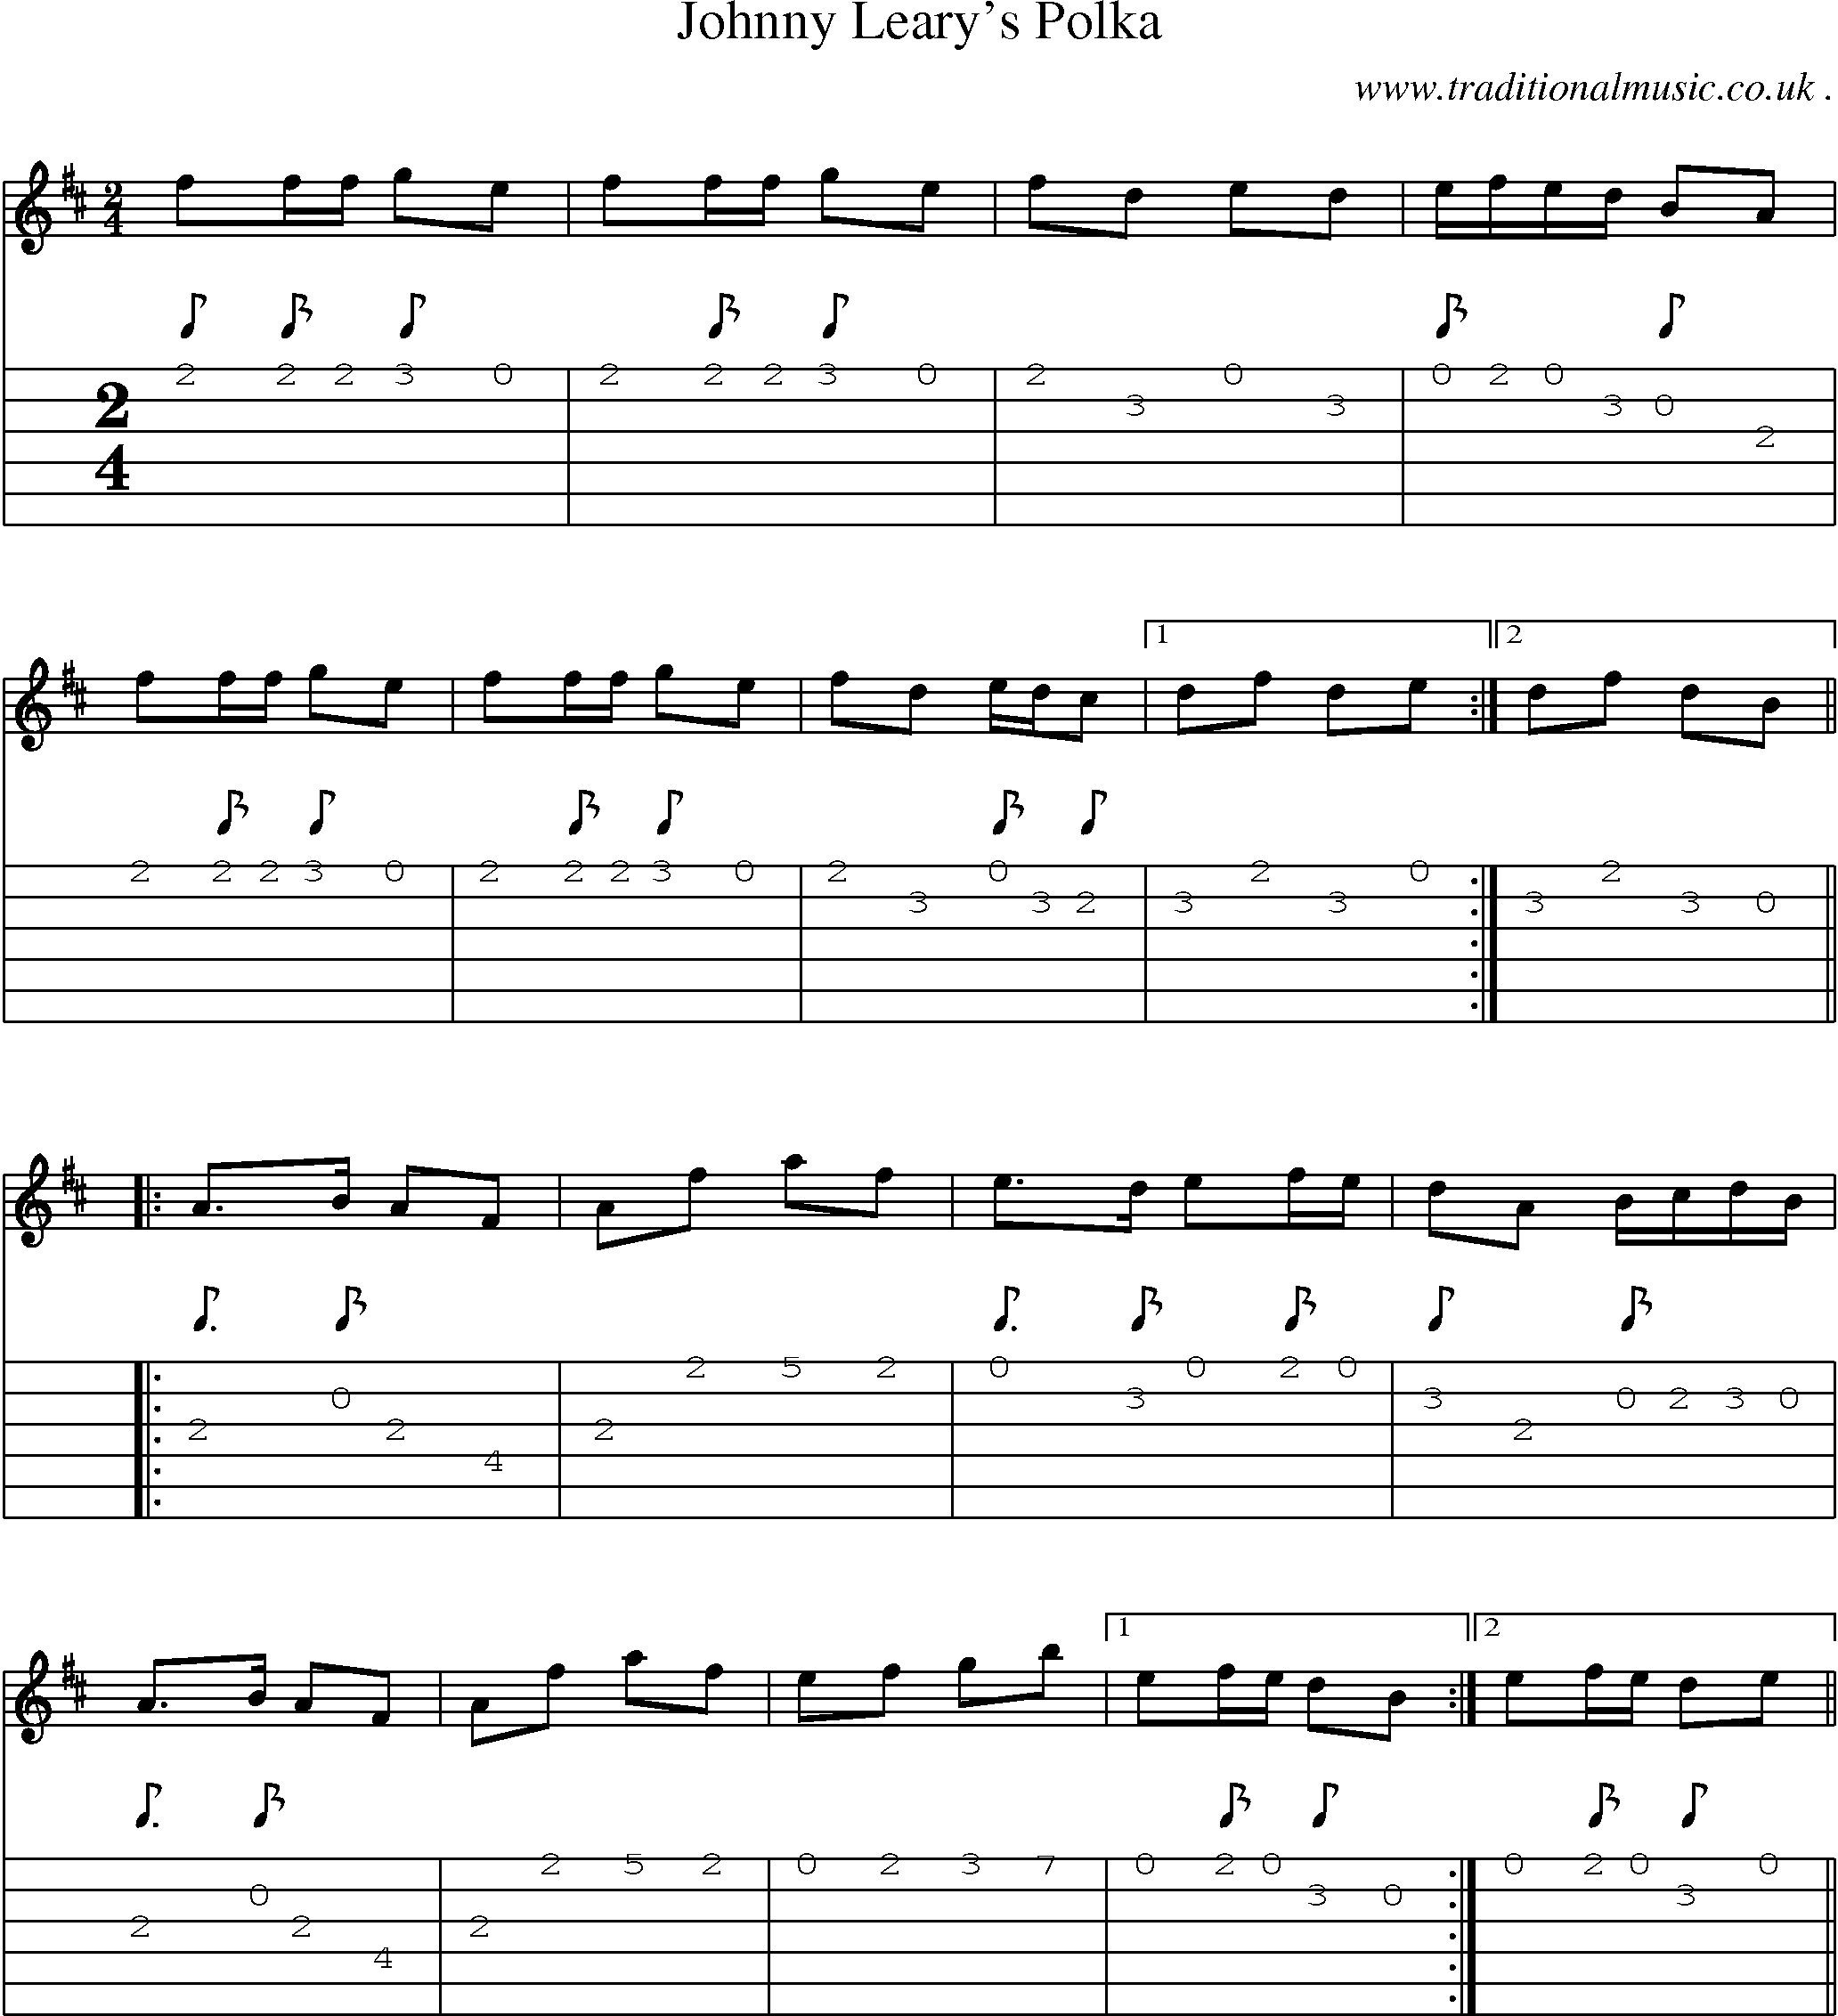 Sheet-Music and Guitar Tabs for Johnny Learys Polka